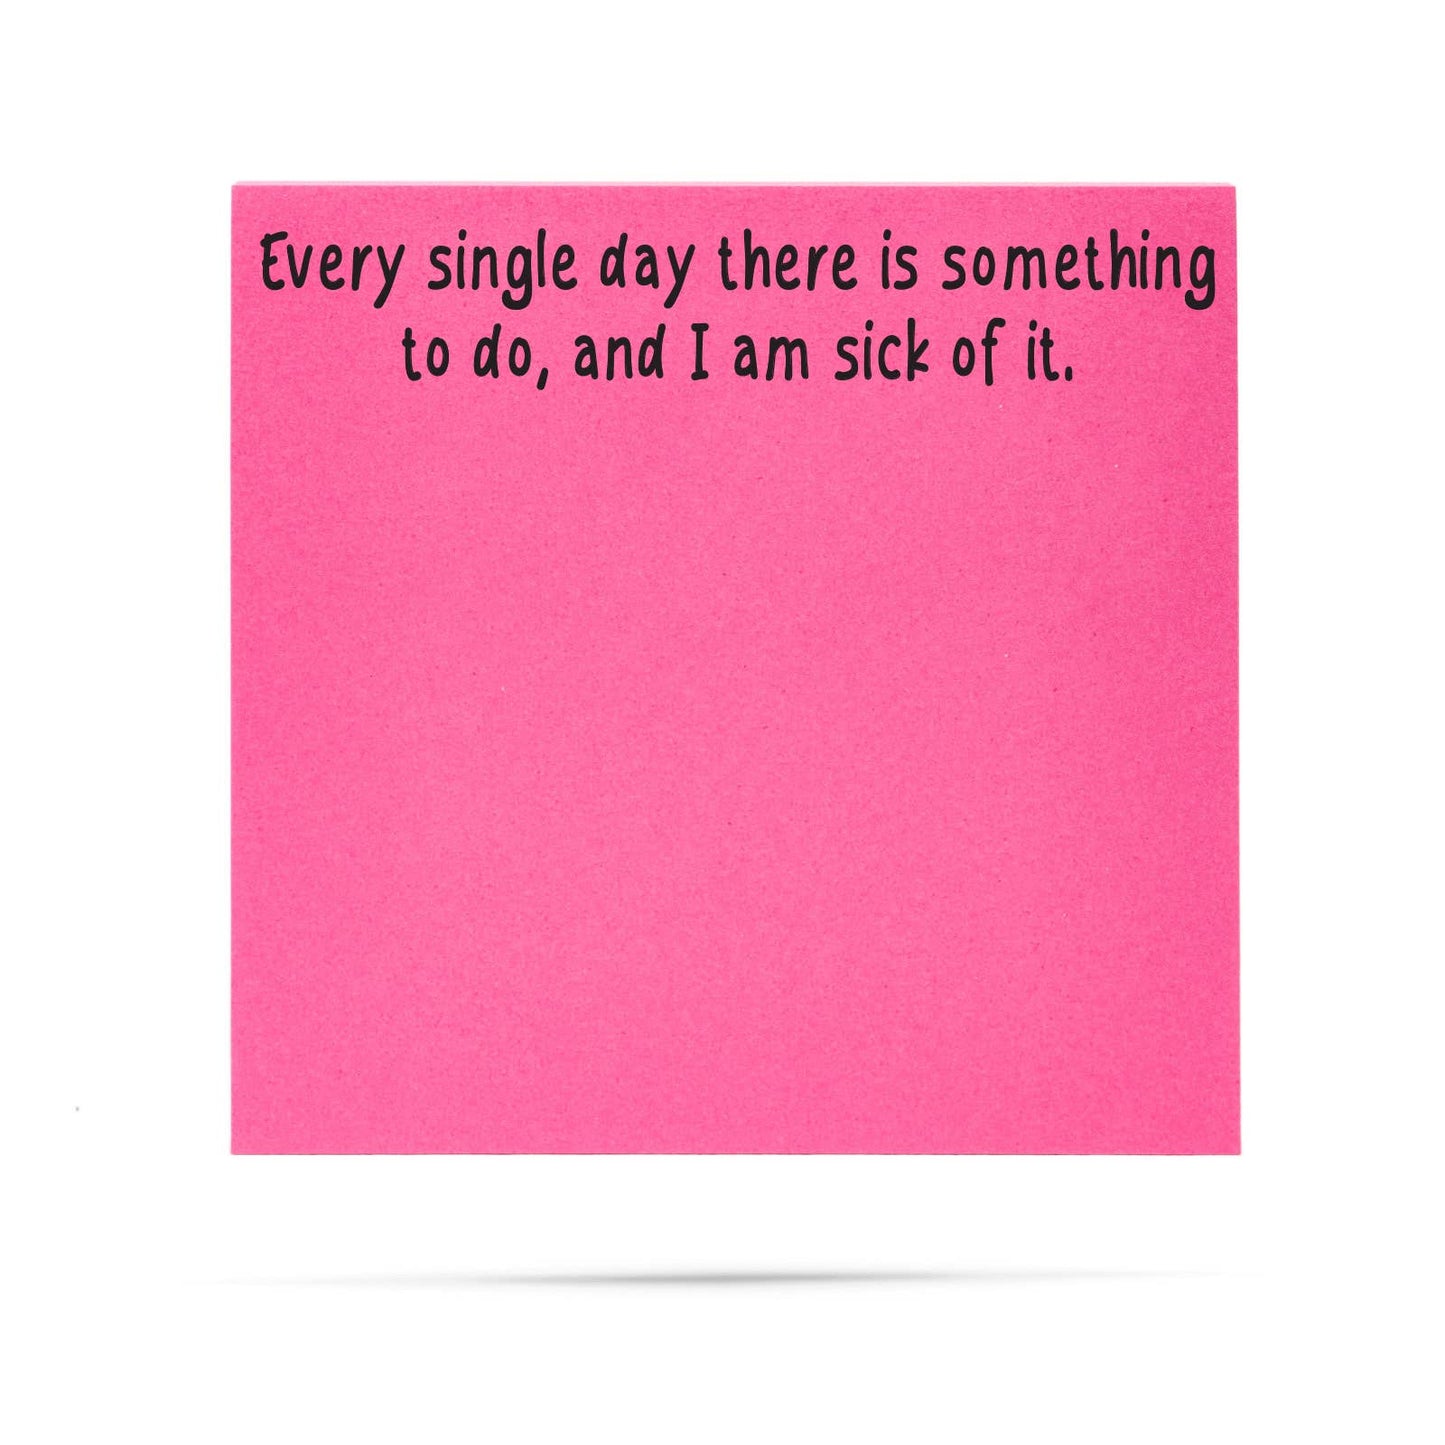 ellembee gift - Every single day there is | funny sticky notes with sayings